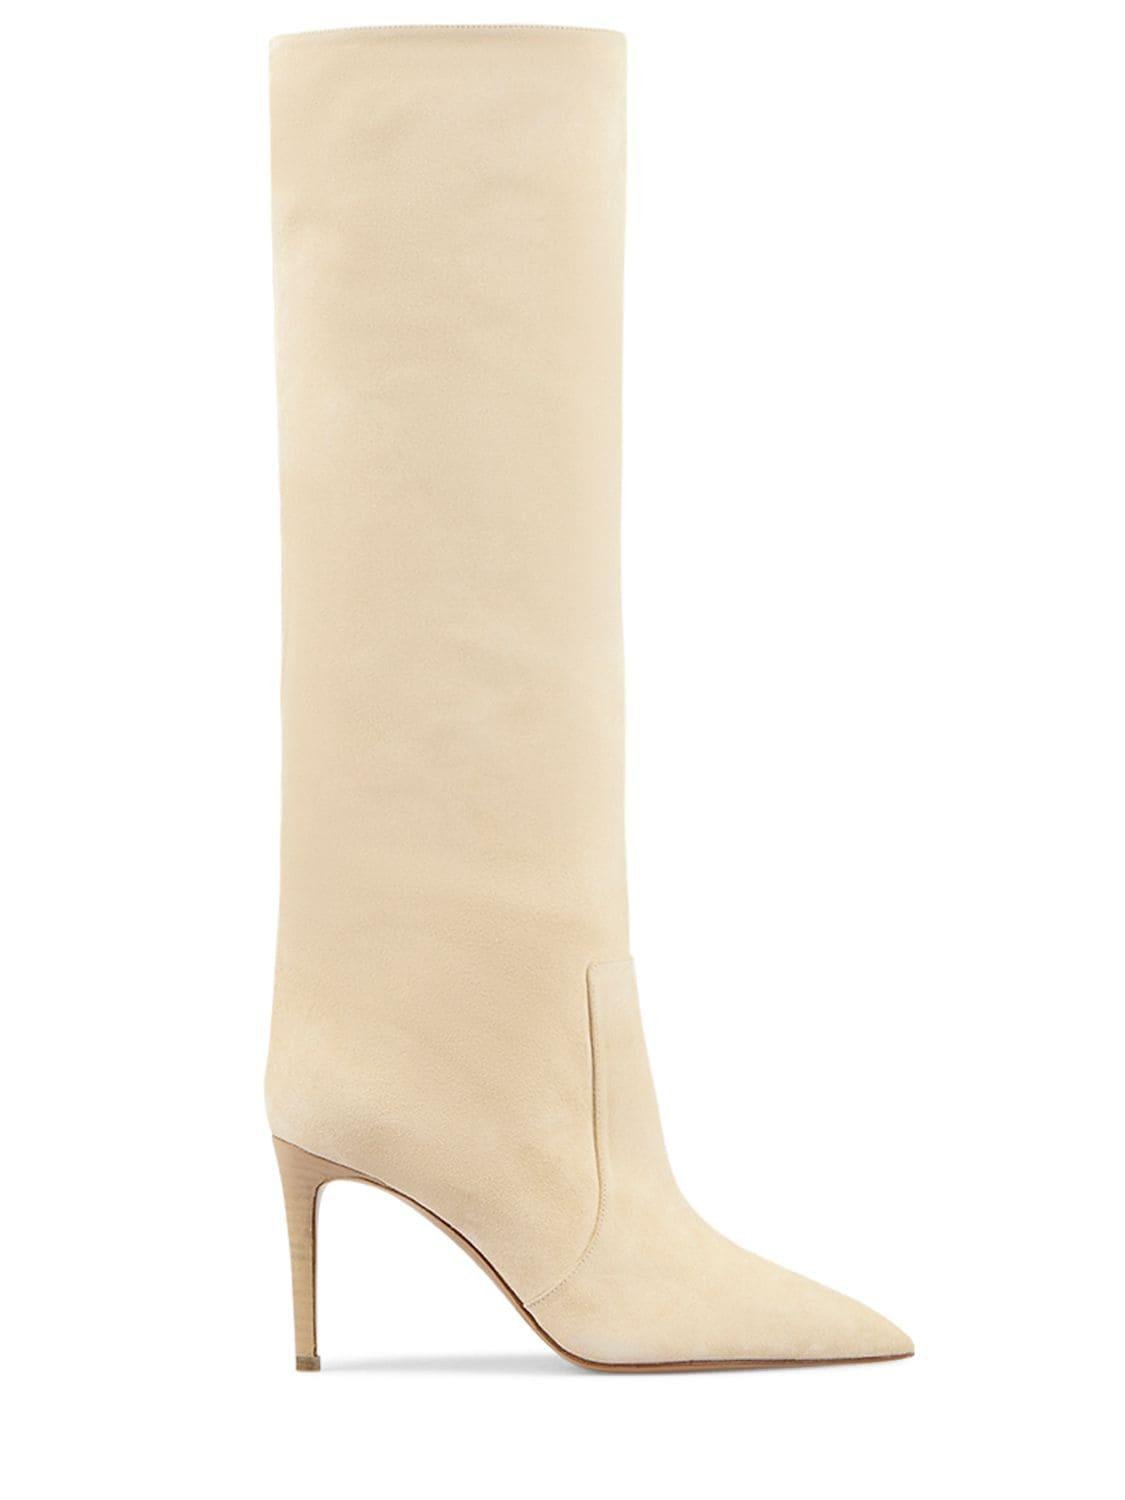 85mm Stiletto Suede Tall Boots by PARIS TEXAS